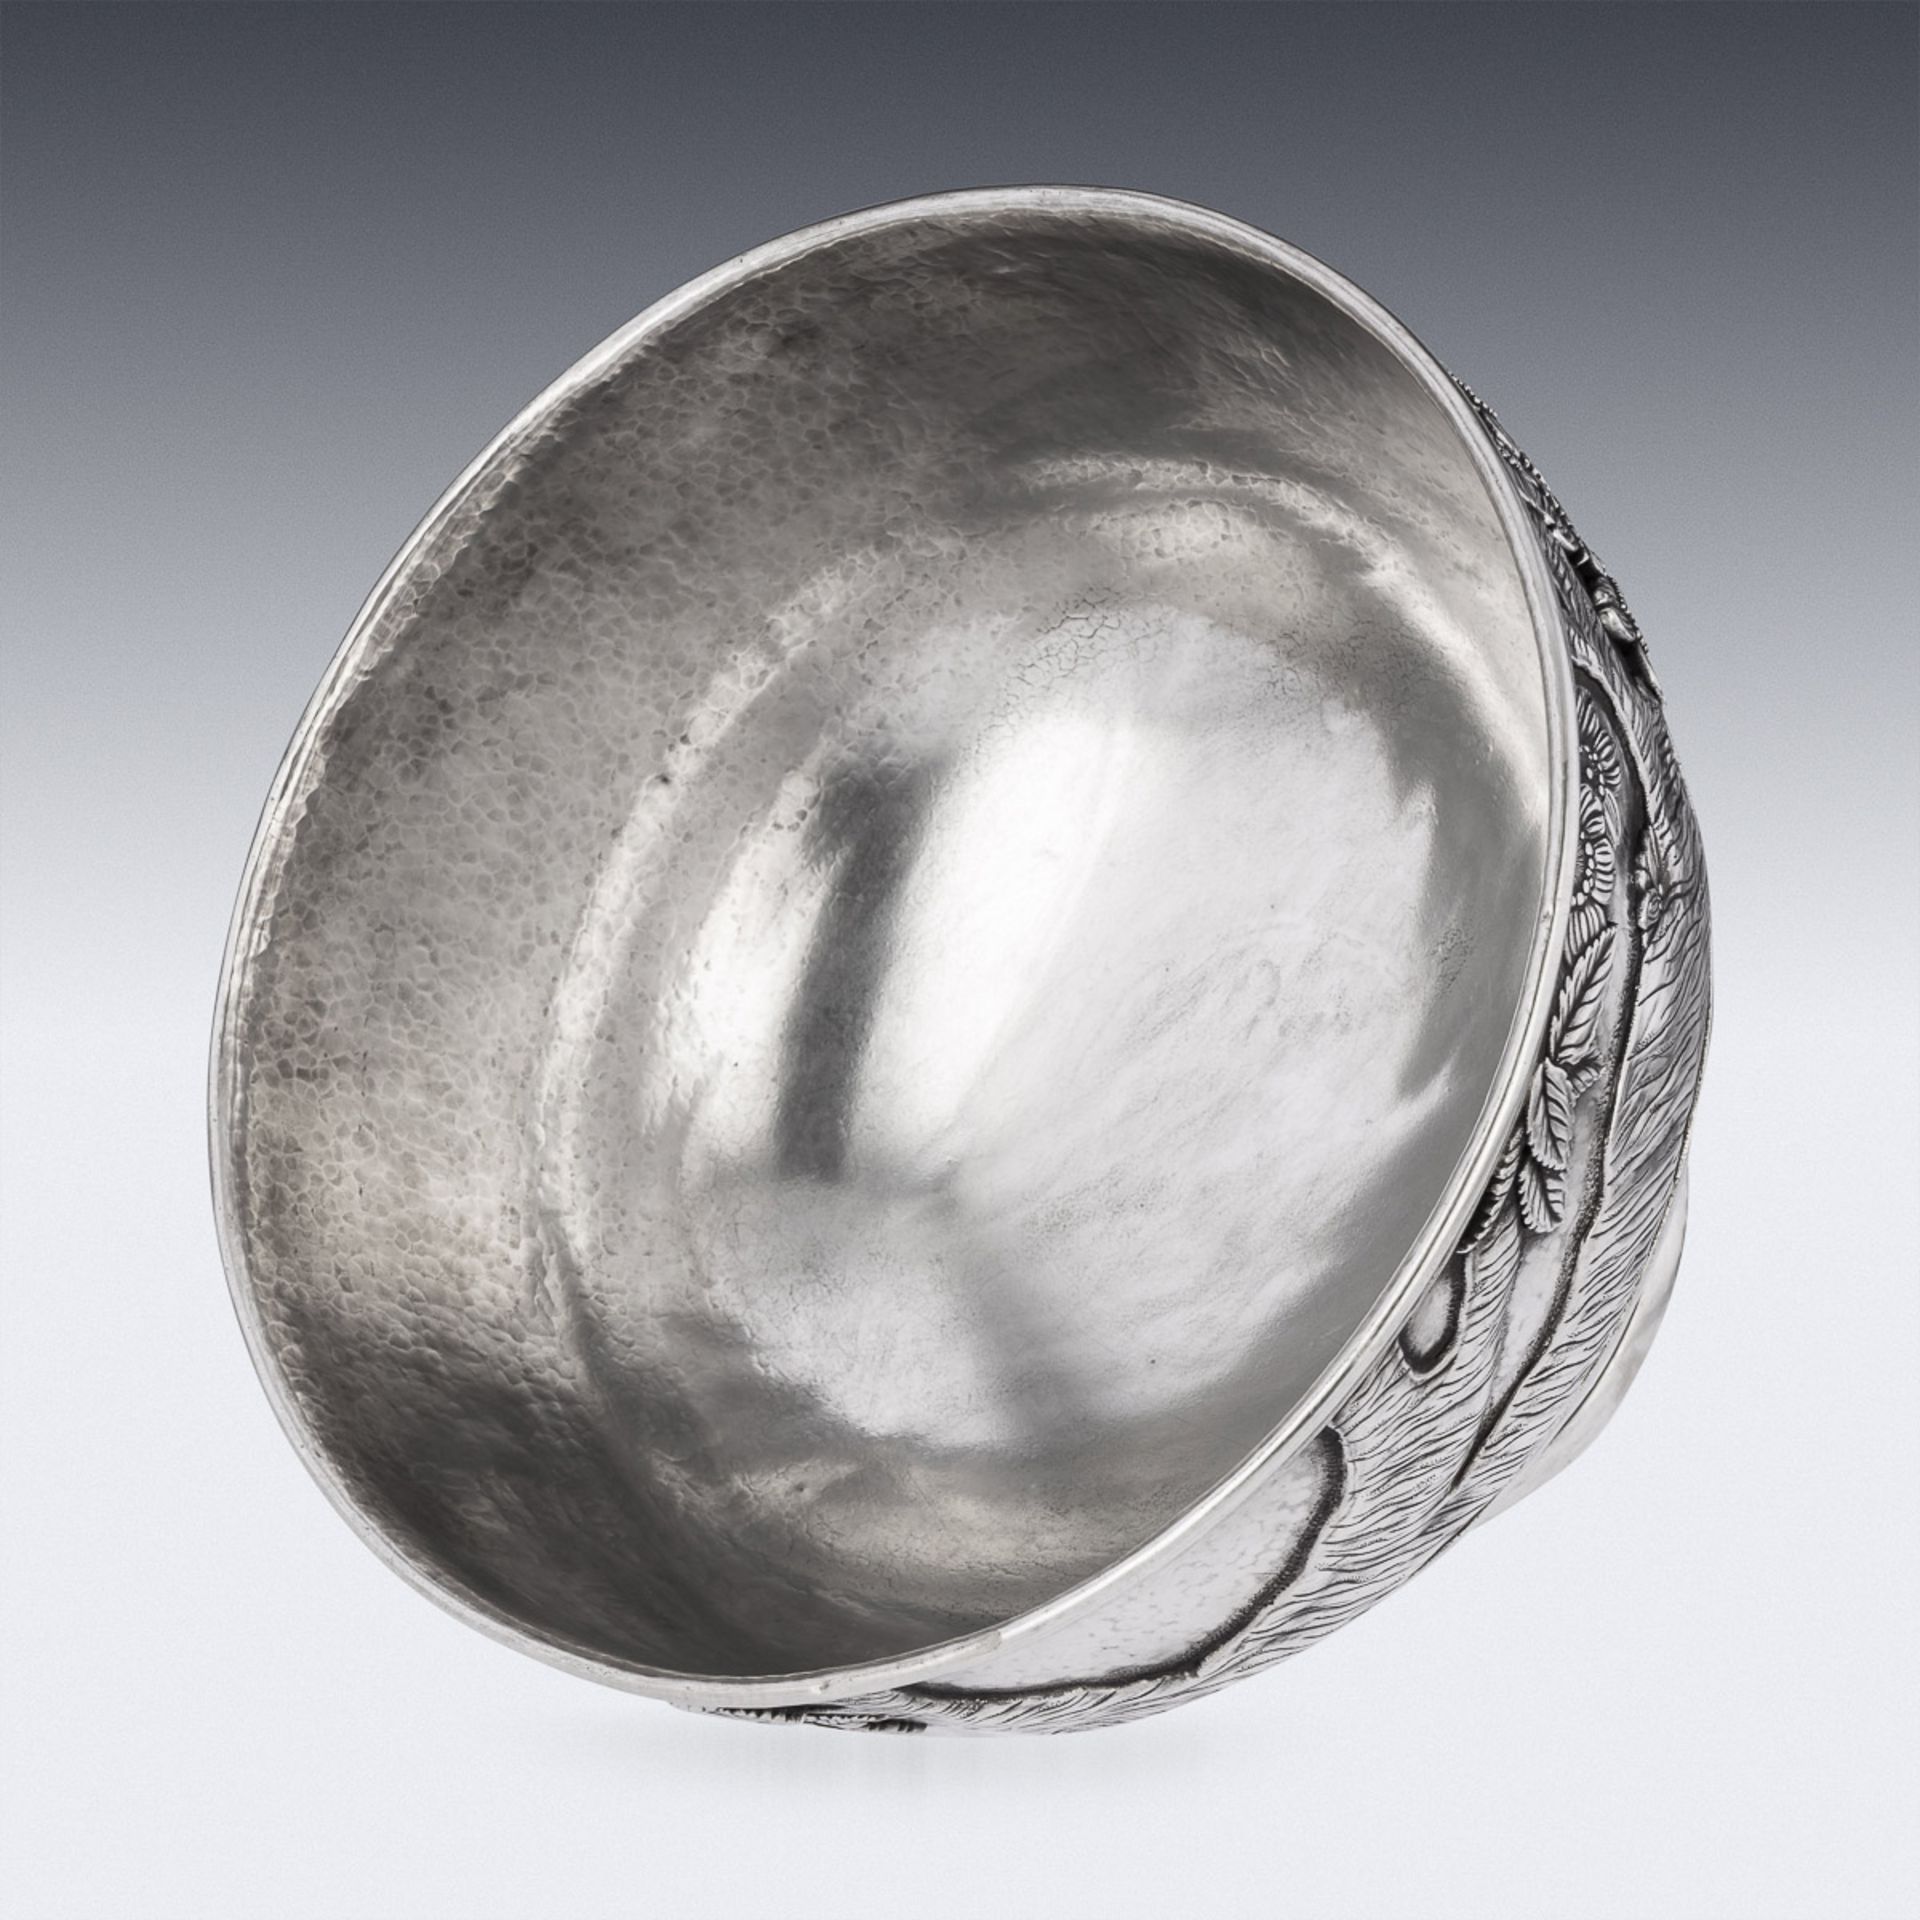 A MONUMENTAL LATE 19TH CENTURY JAPANESE SOLID SILVER BOWL C. 1900 - Image 8 of 17